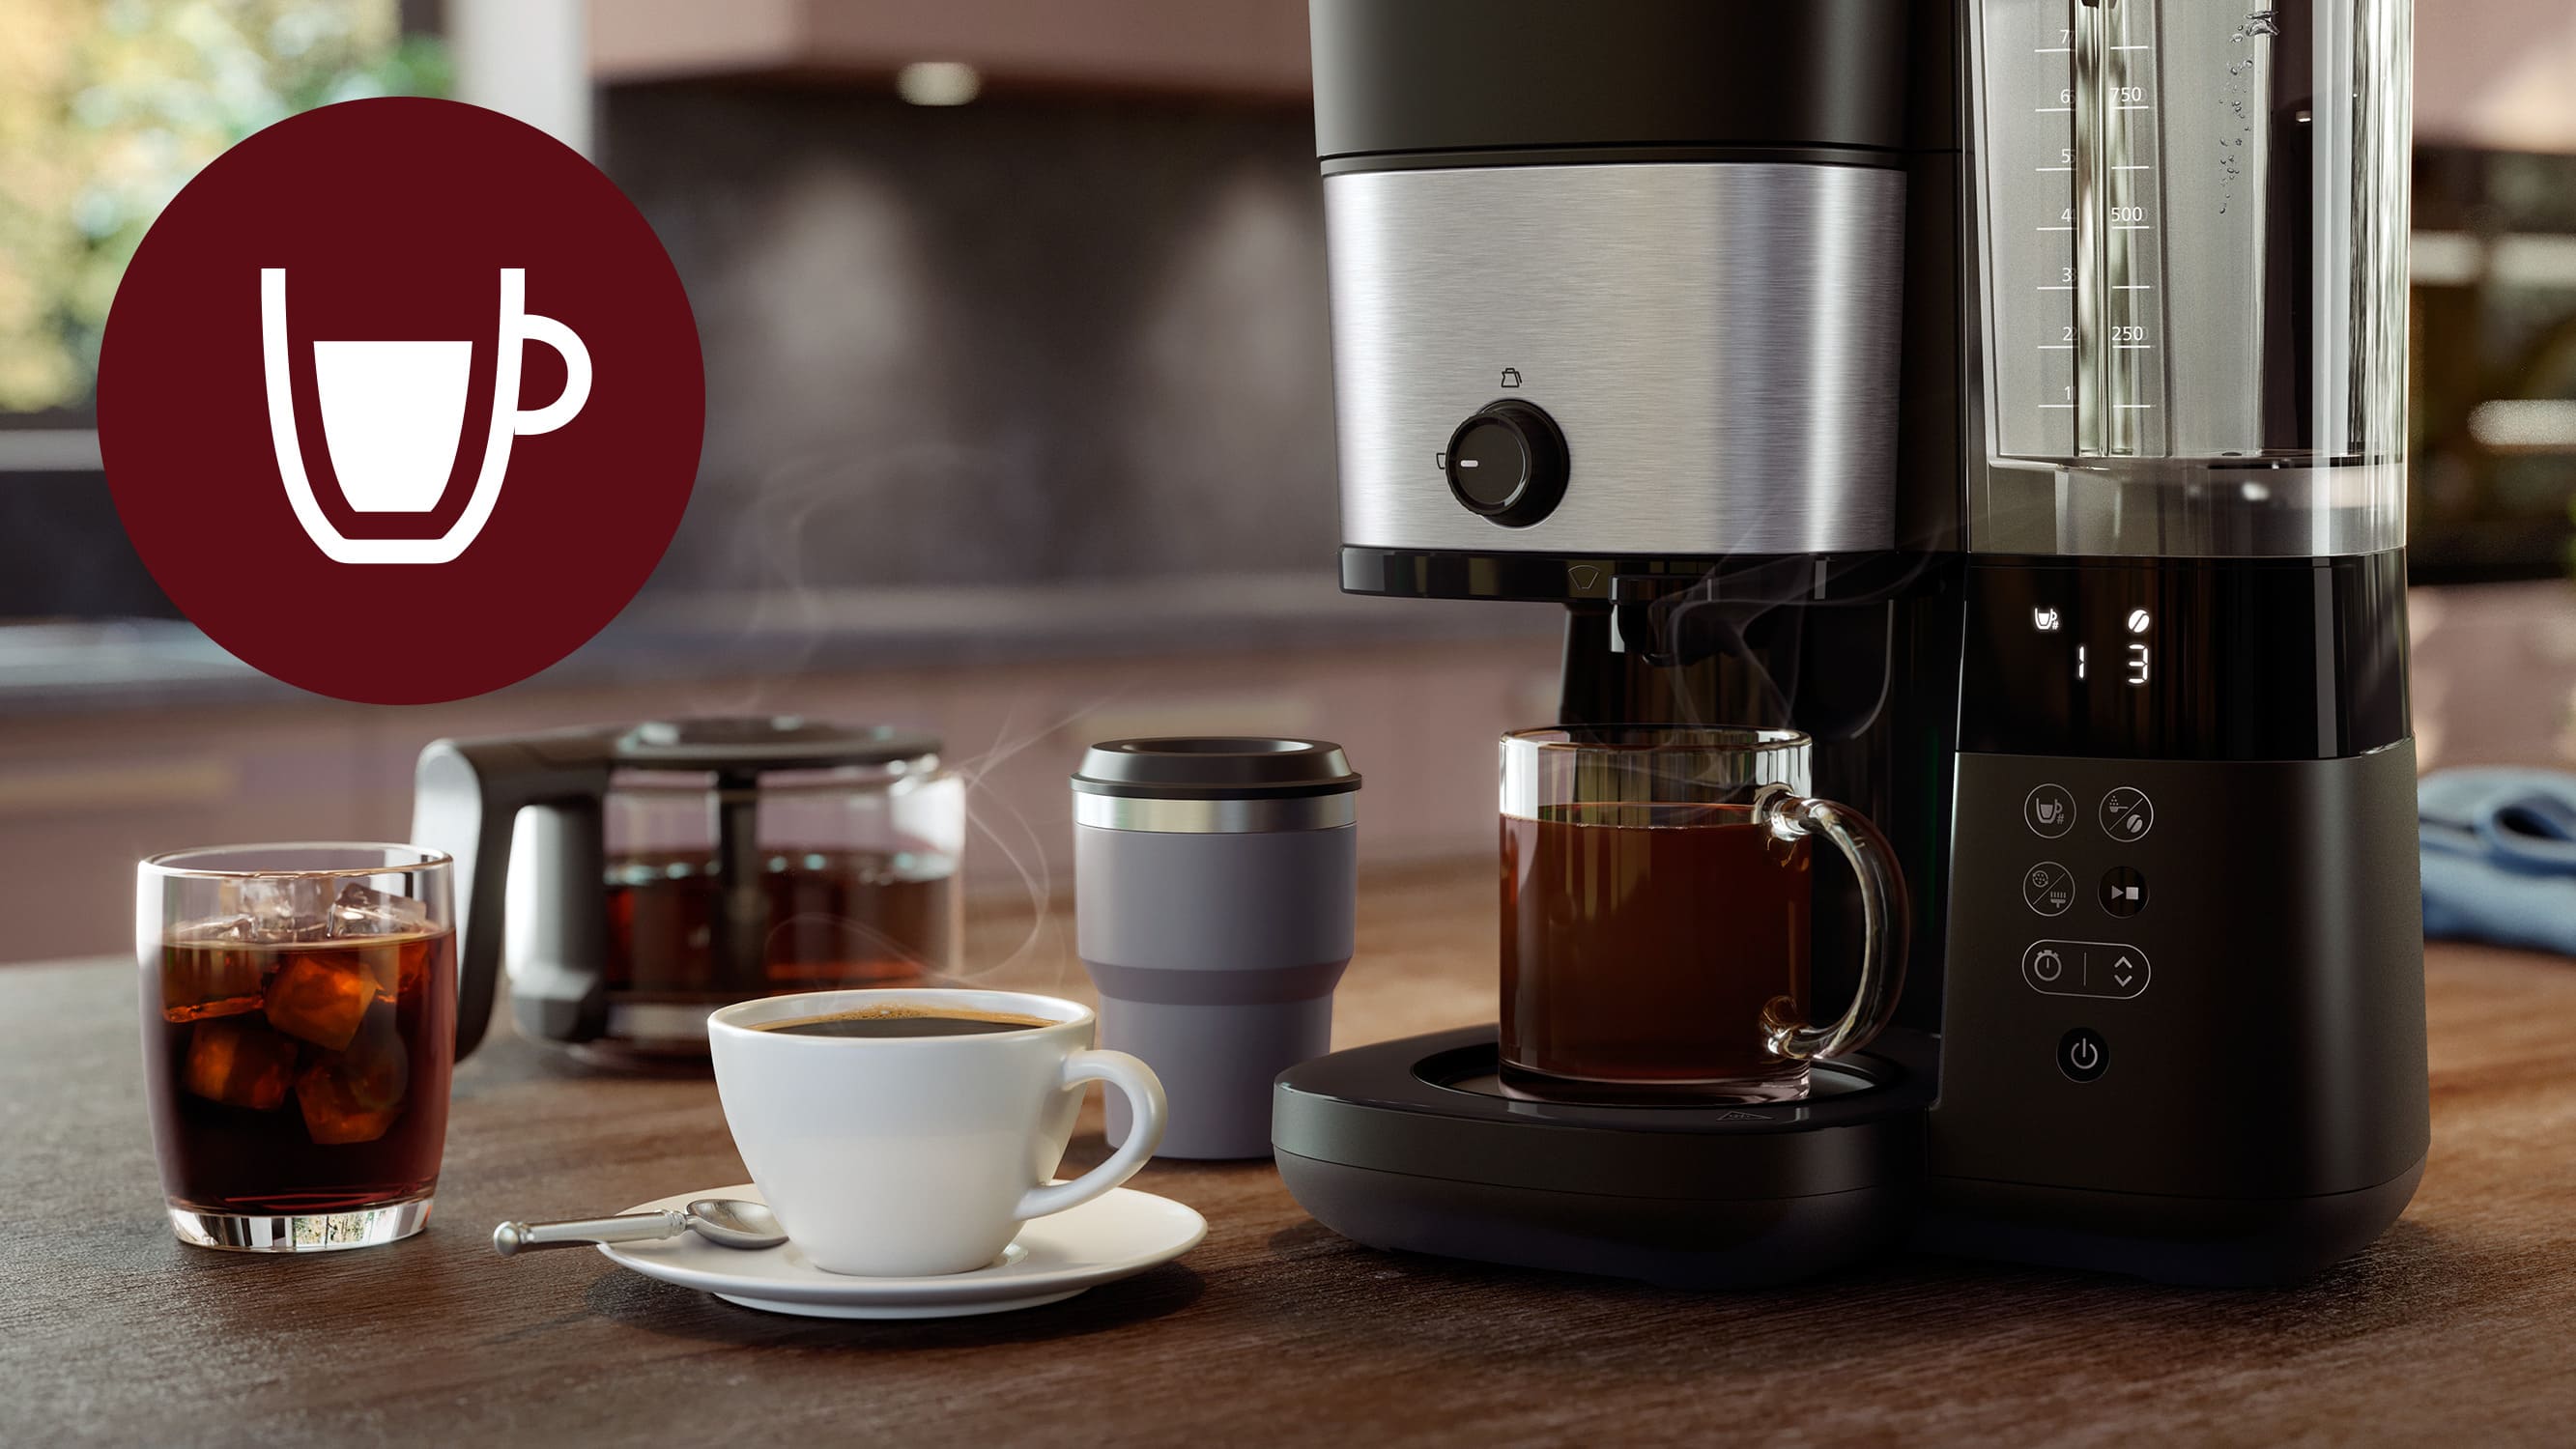 Philips All-in-1 Brew HD7900/50